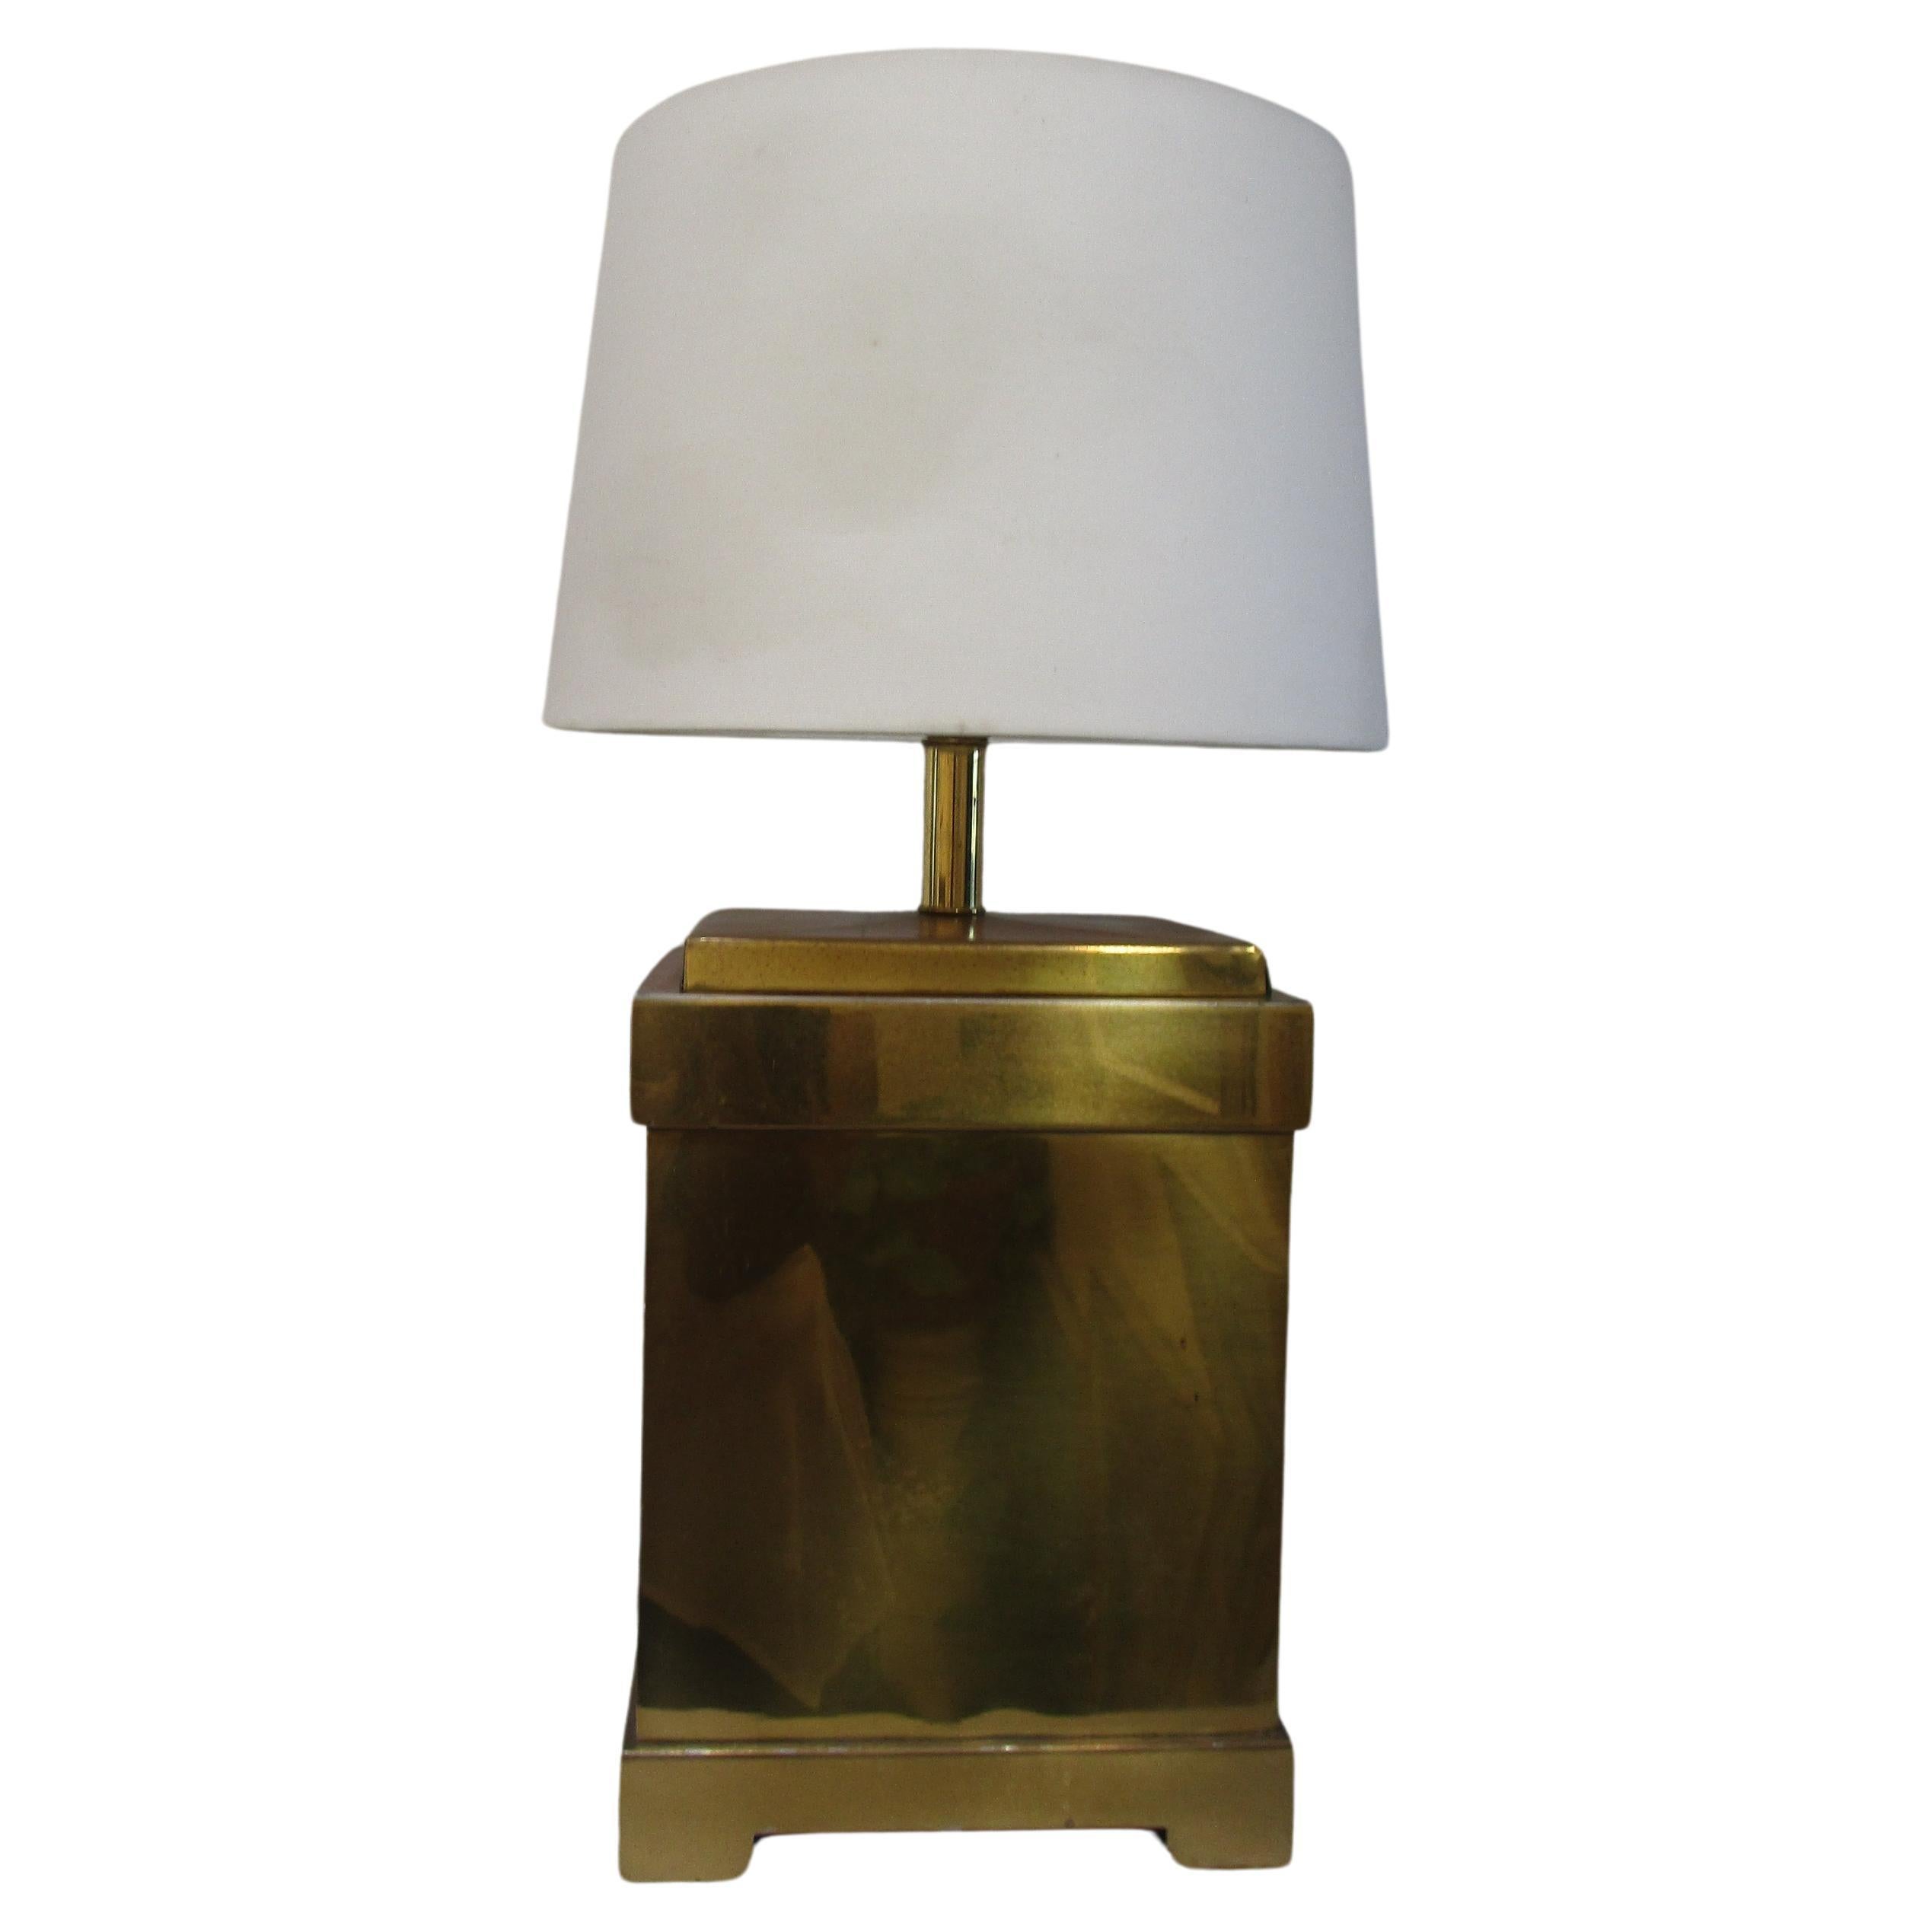 Vintage Bright Brass Cube Remington Table Lamp from Hong Kong For Sale